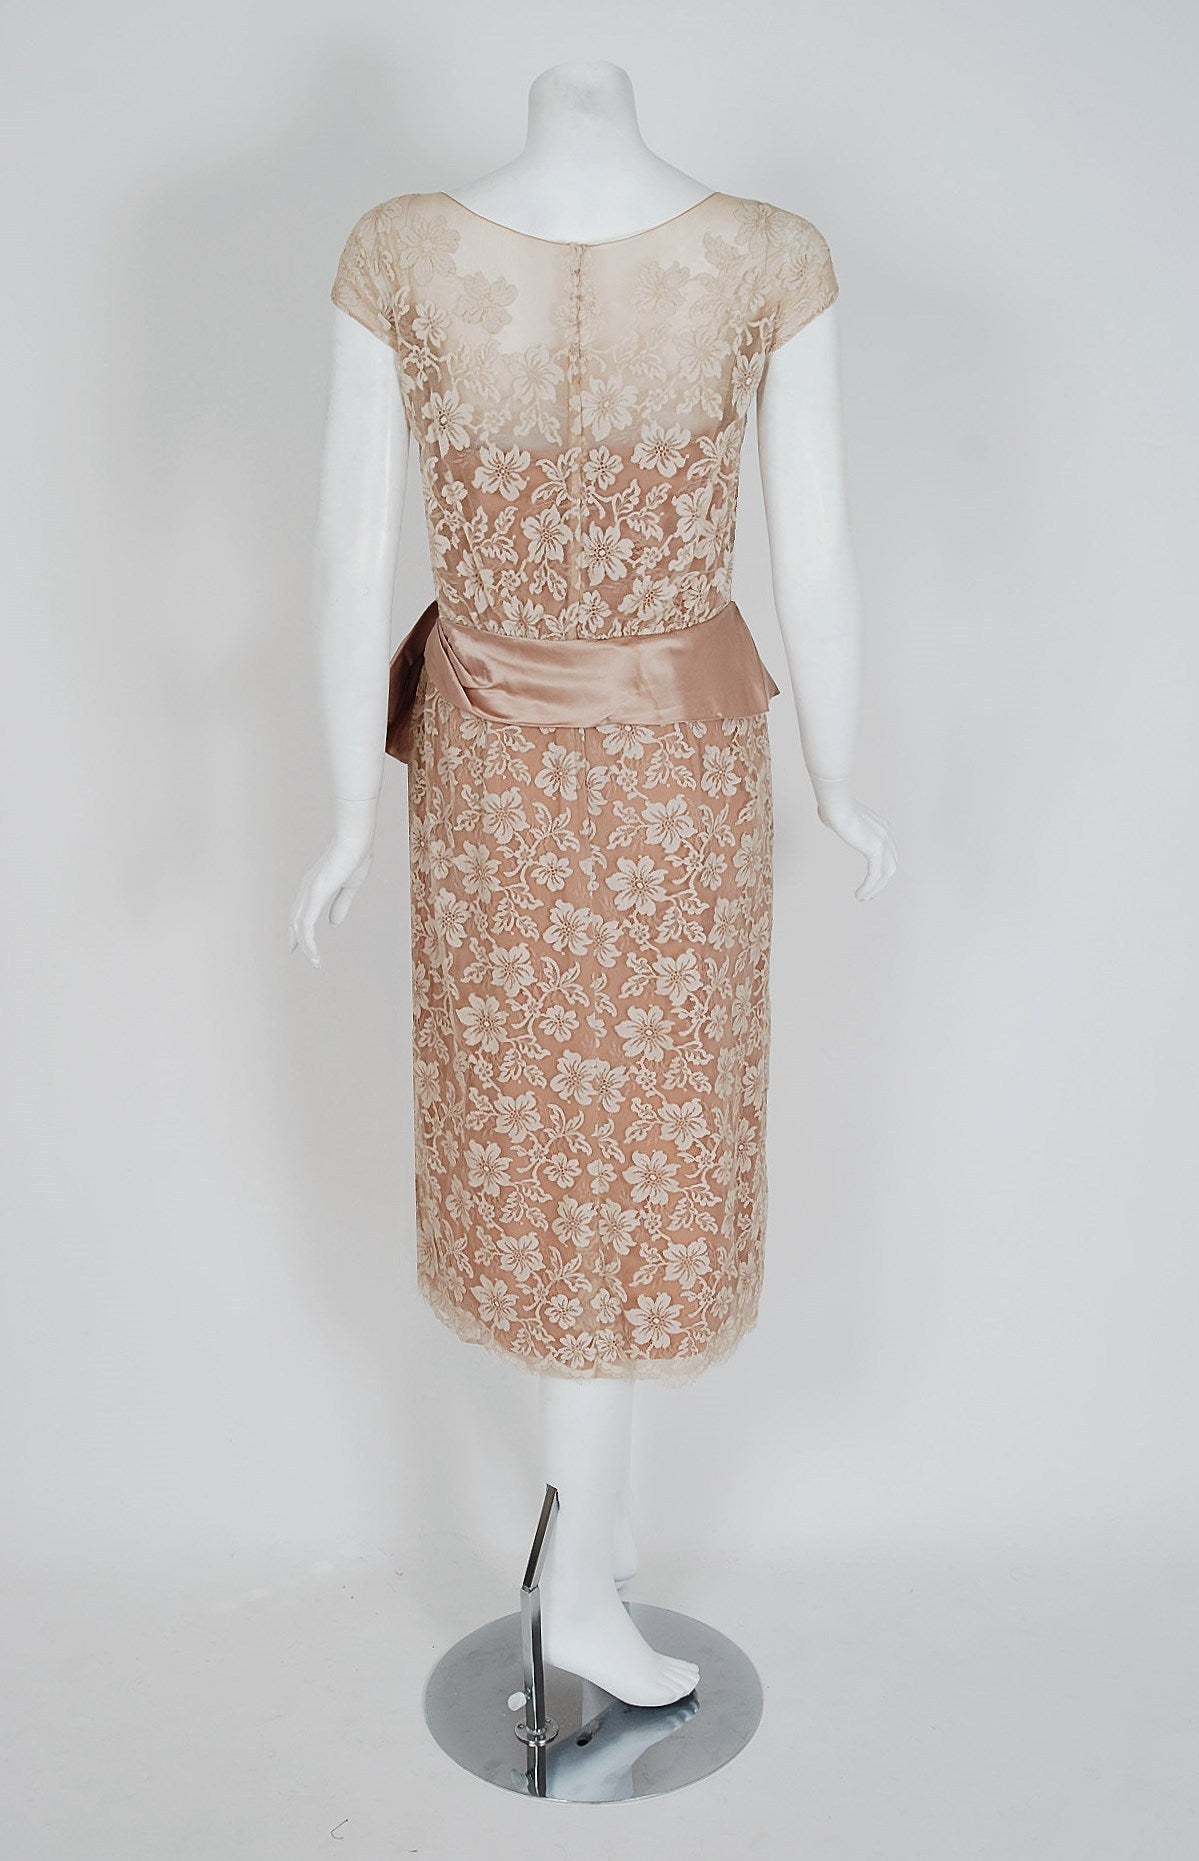 Women's 1950's Peggy Hunt Nude & Ivory Lace Sheer-Illusion Peplum Cocktail Party Dress